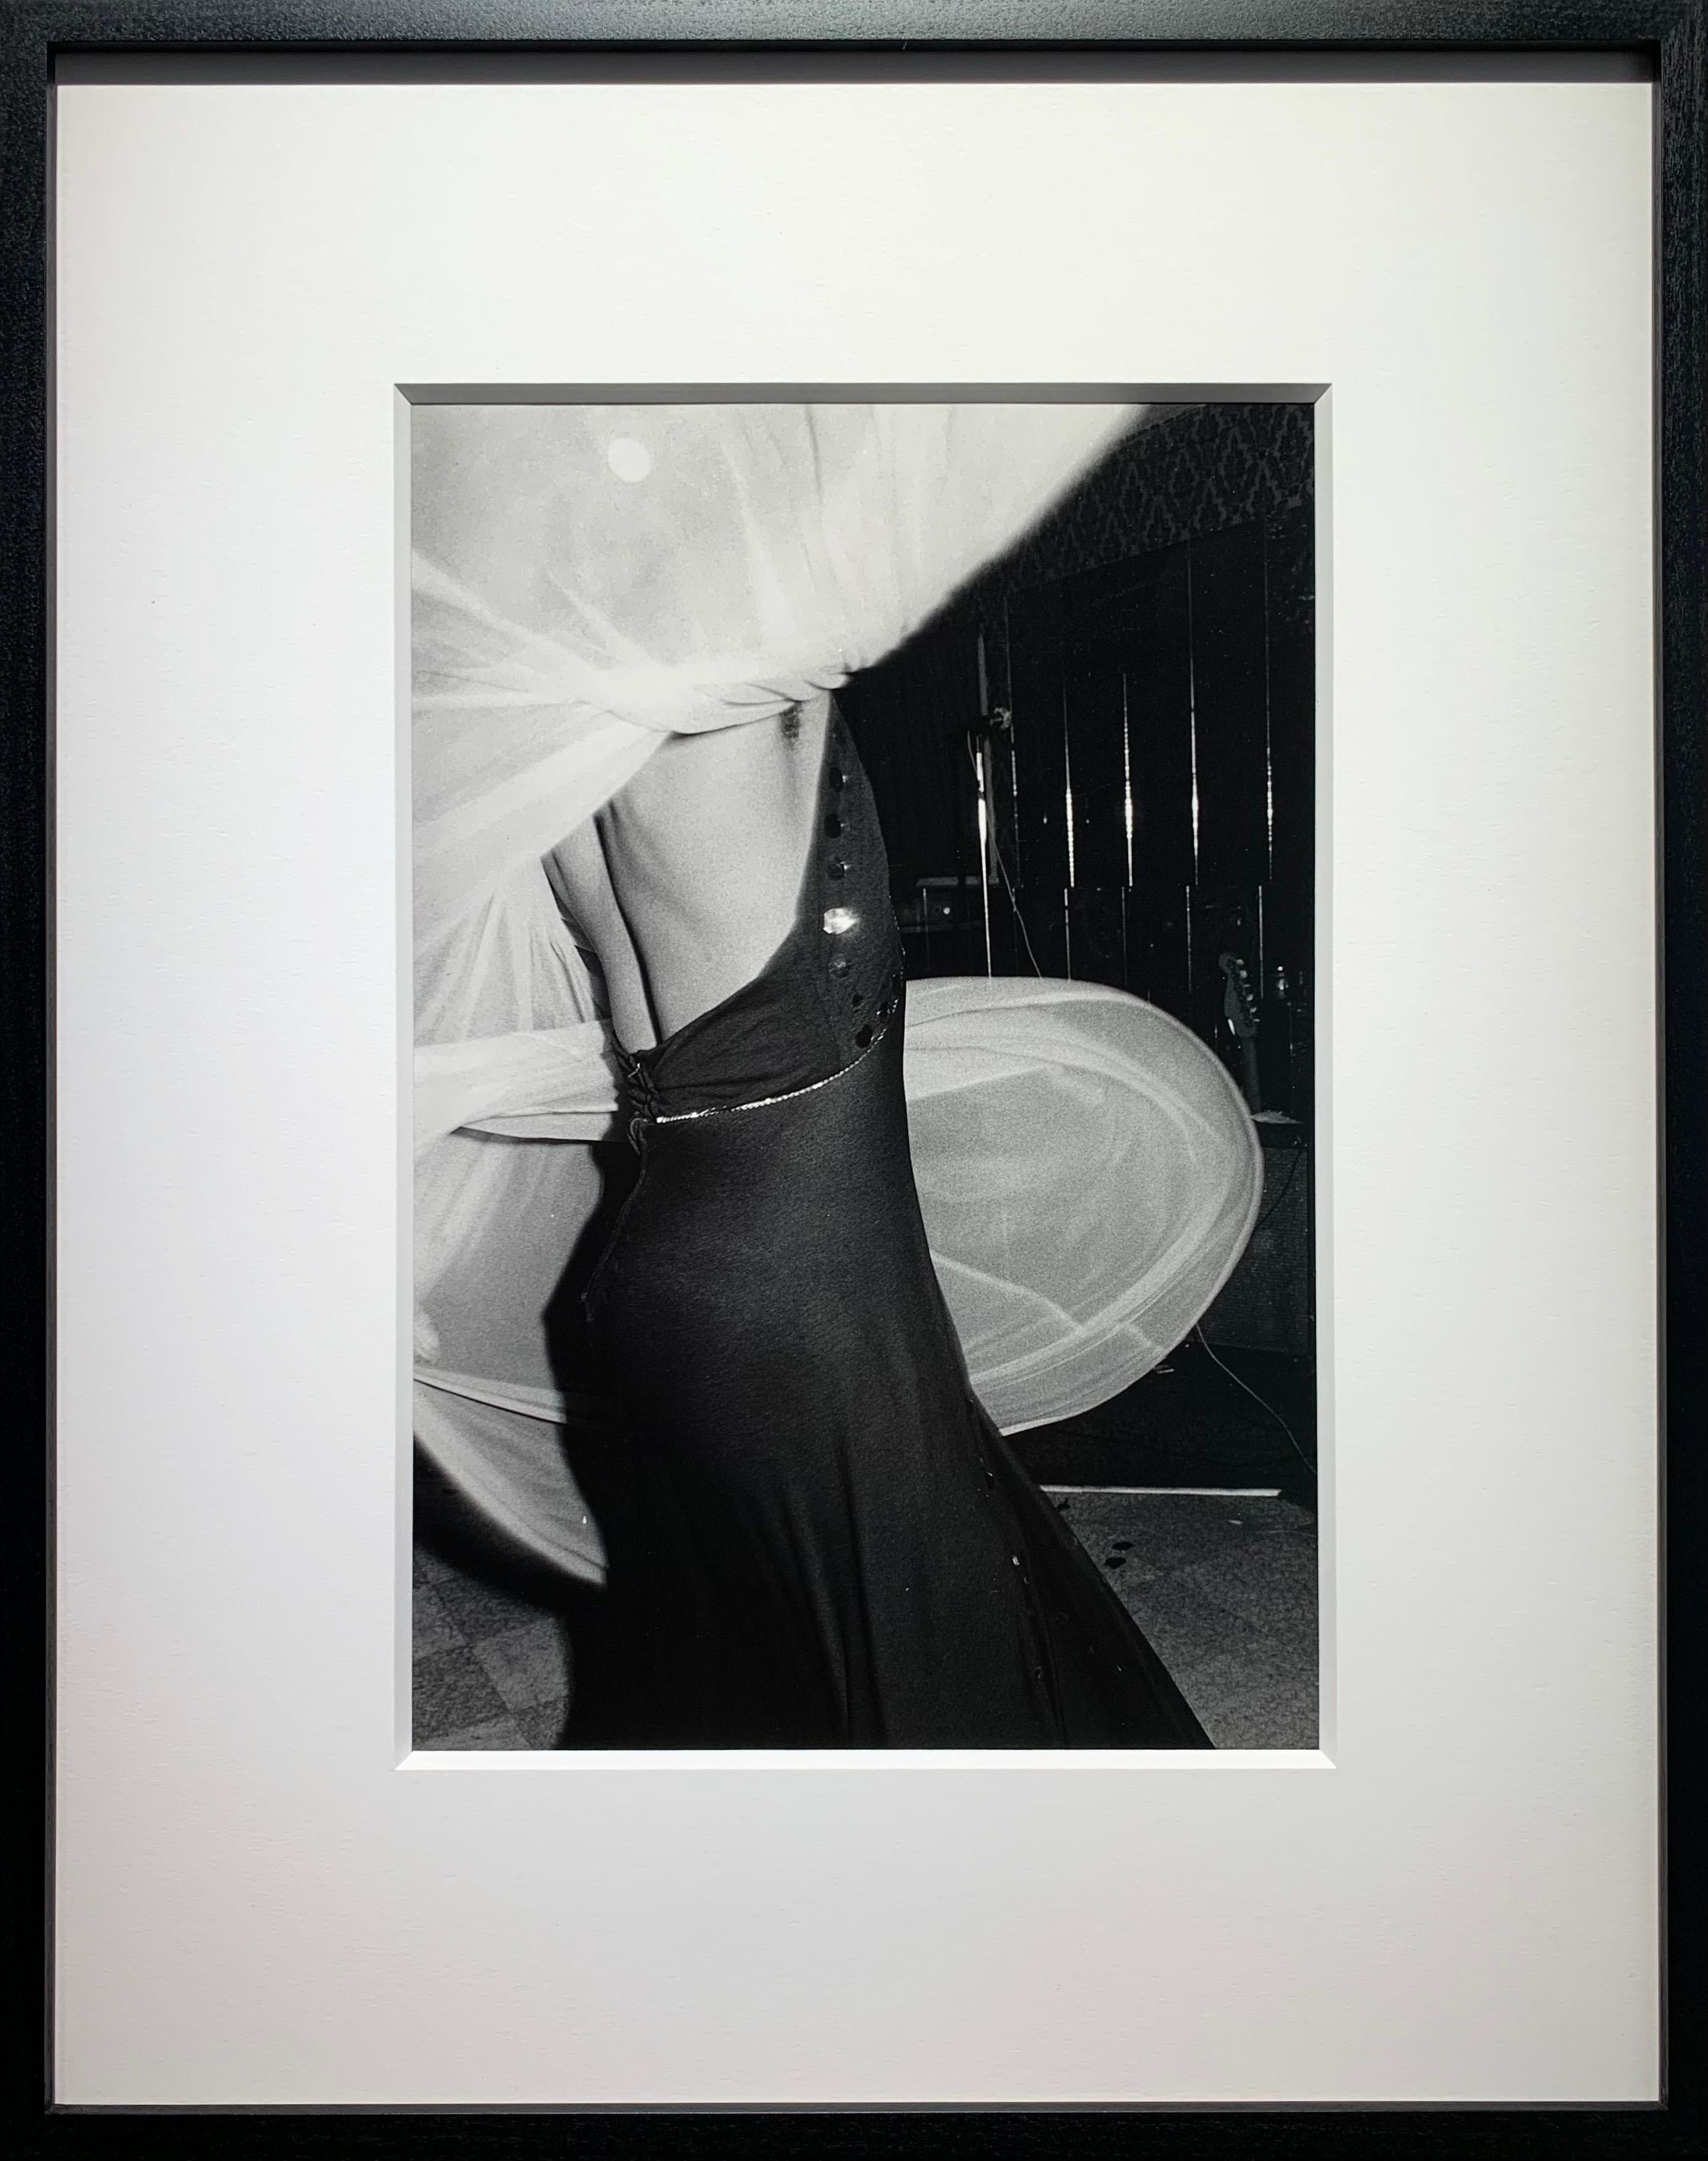 #19, 1970s Nightclubs of Chicago South Side - Rare Vintage Silver Gelatin Print - Photograph by Michael Abramson